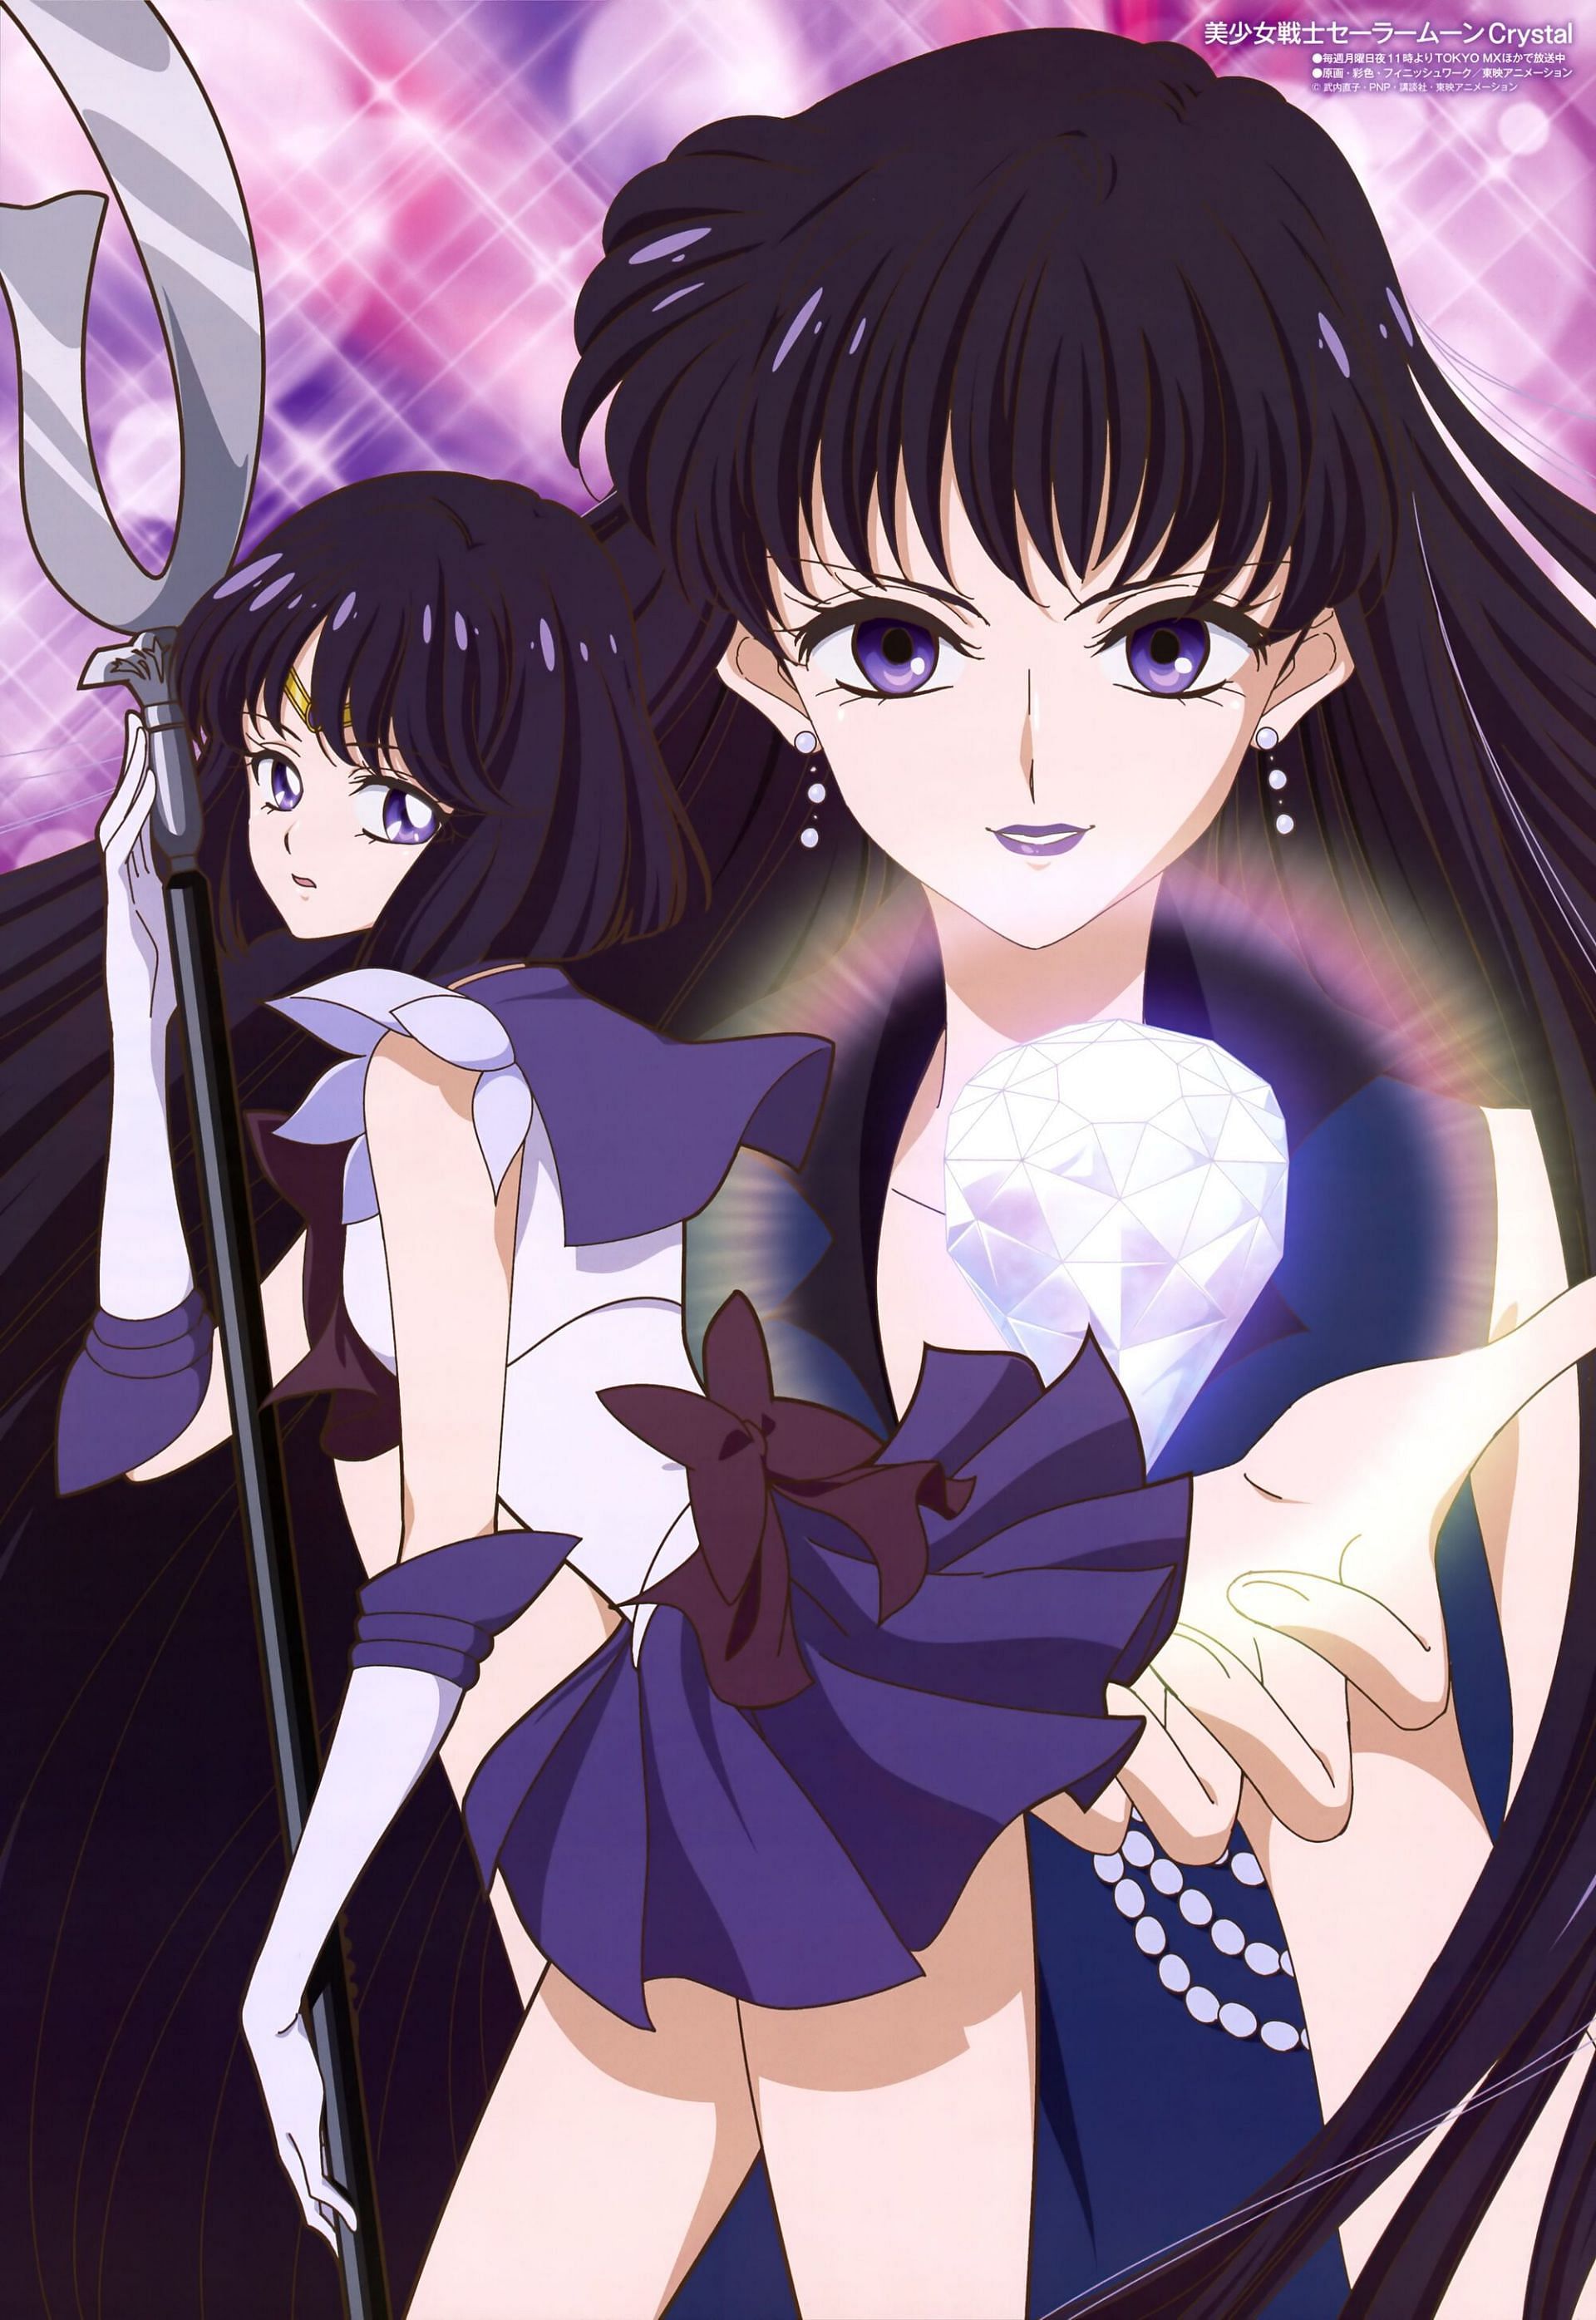 Mistress 9 and Sailor Saturn (Image by Toei Animation)